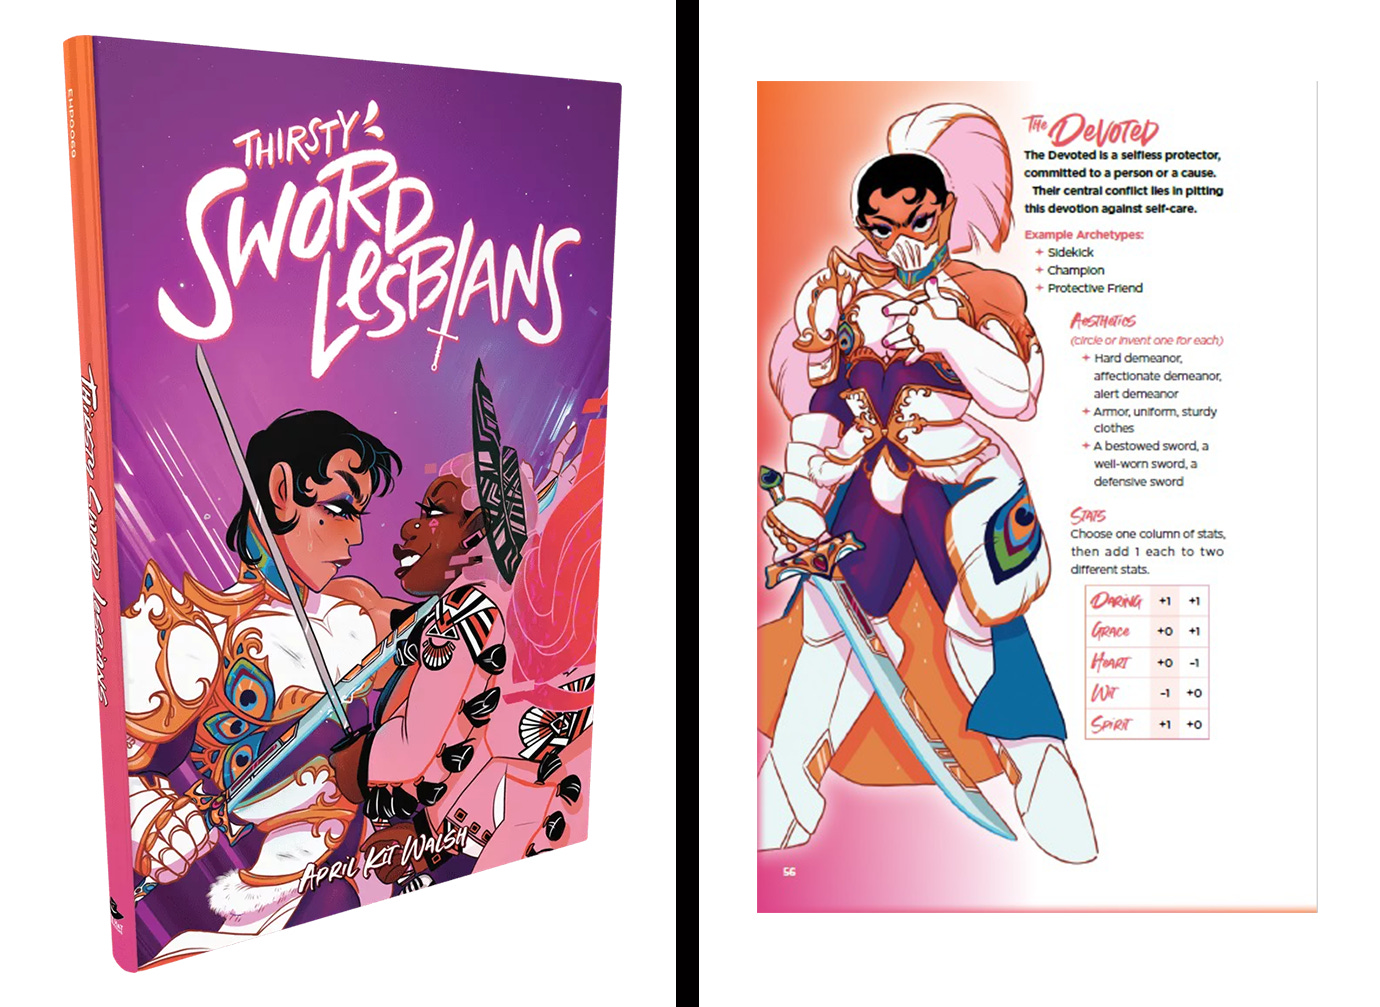 Renderings of two books side-by-side on a white background. On the left is Thirsty Sword Lesbians, and on the right, an example page showcasing The Devoted. All headings and stat fonts are in a dynamic handwritten font, and the content is a small sans serif.